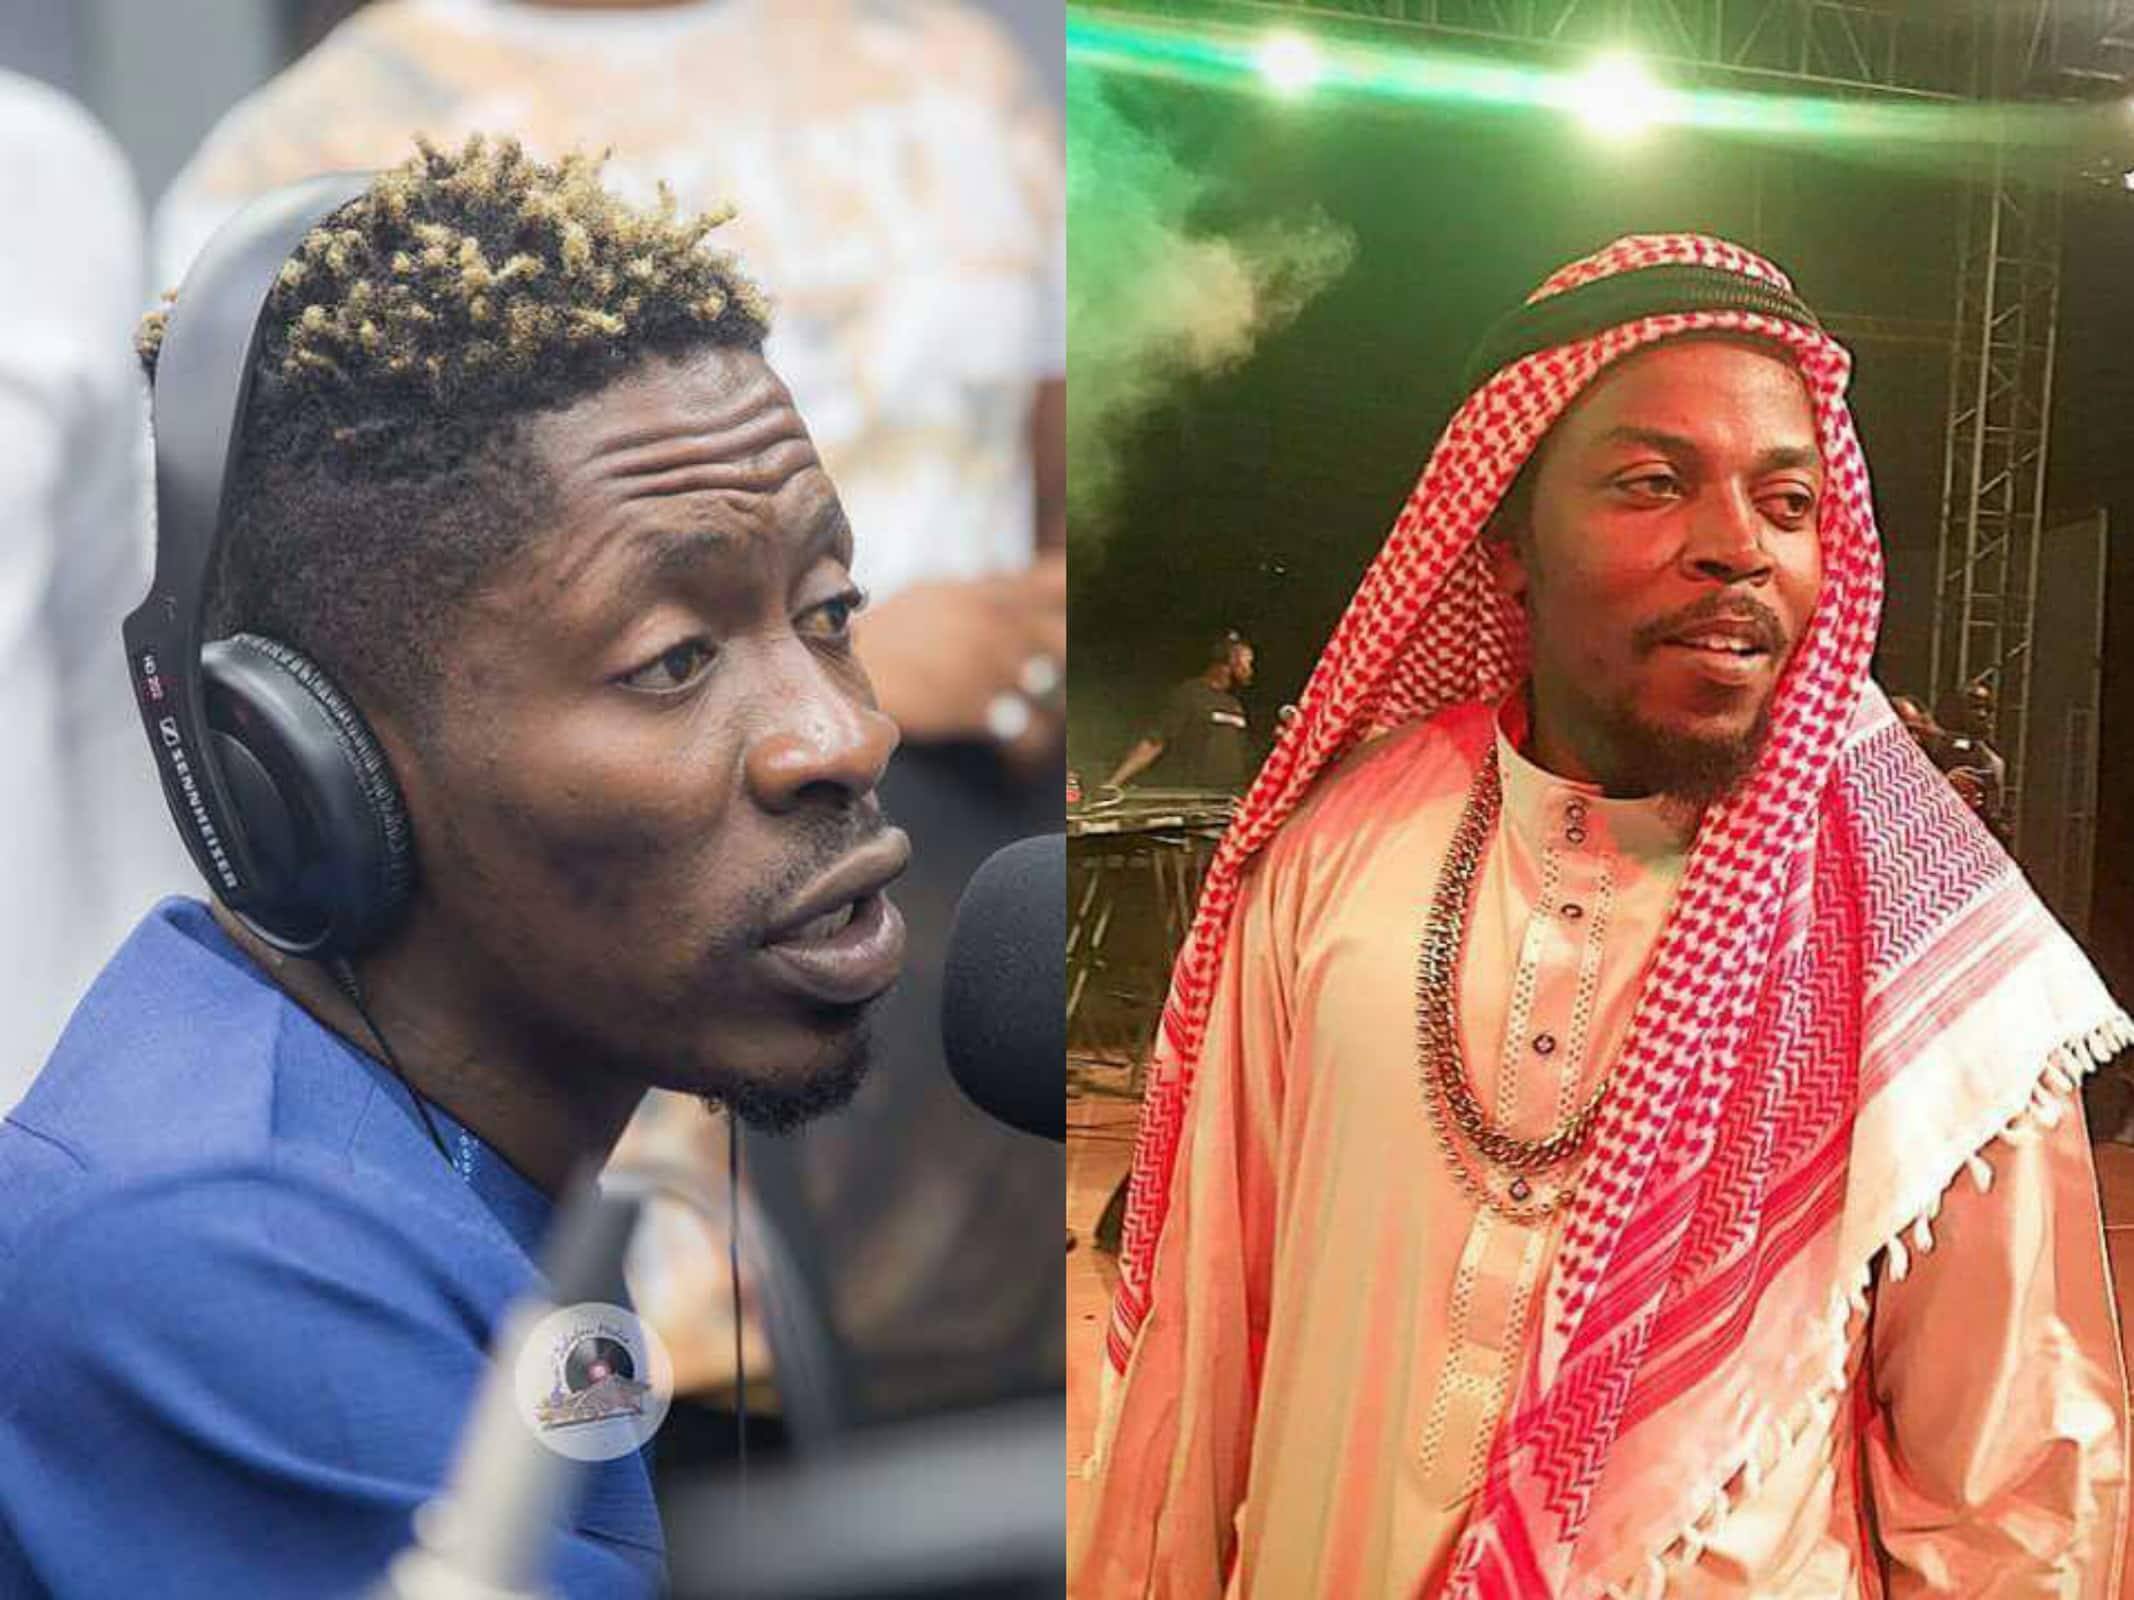 Stop giving your wife for loan - Kwaw Kese to Shatta Wale